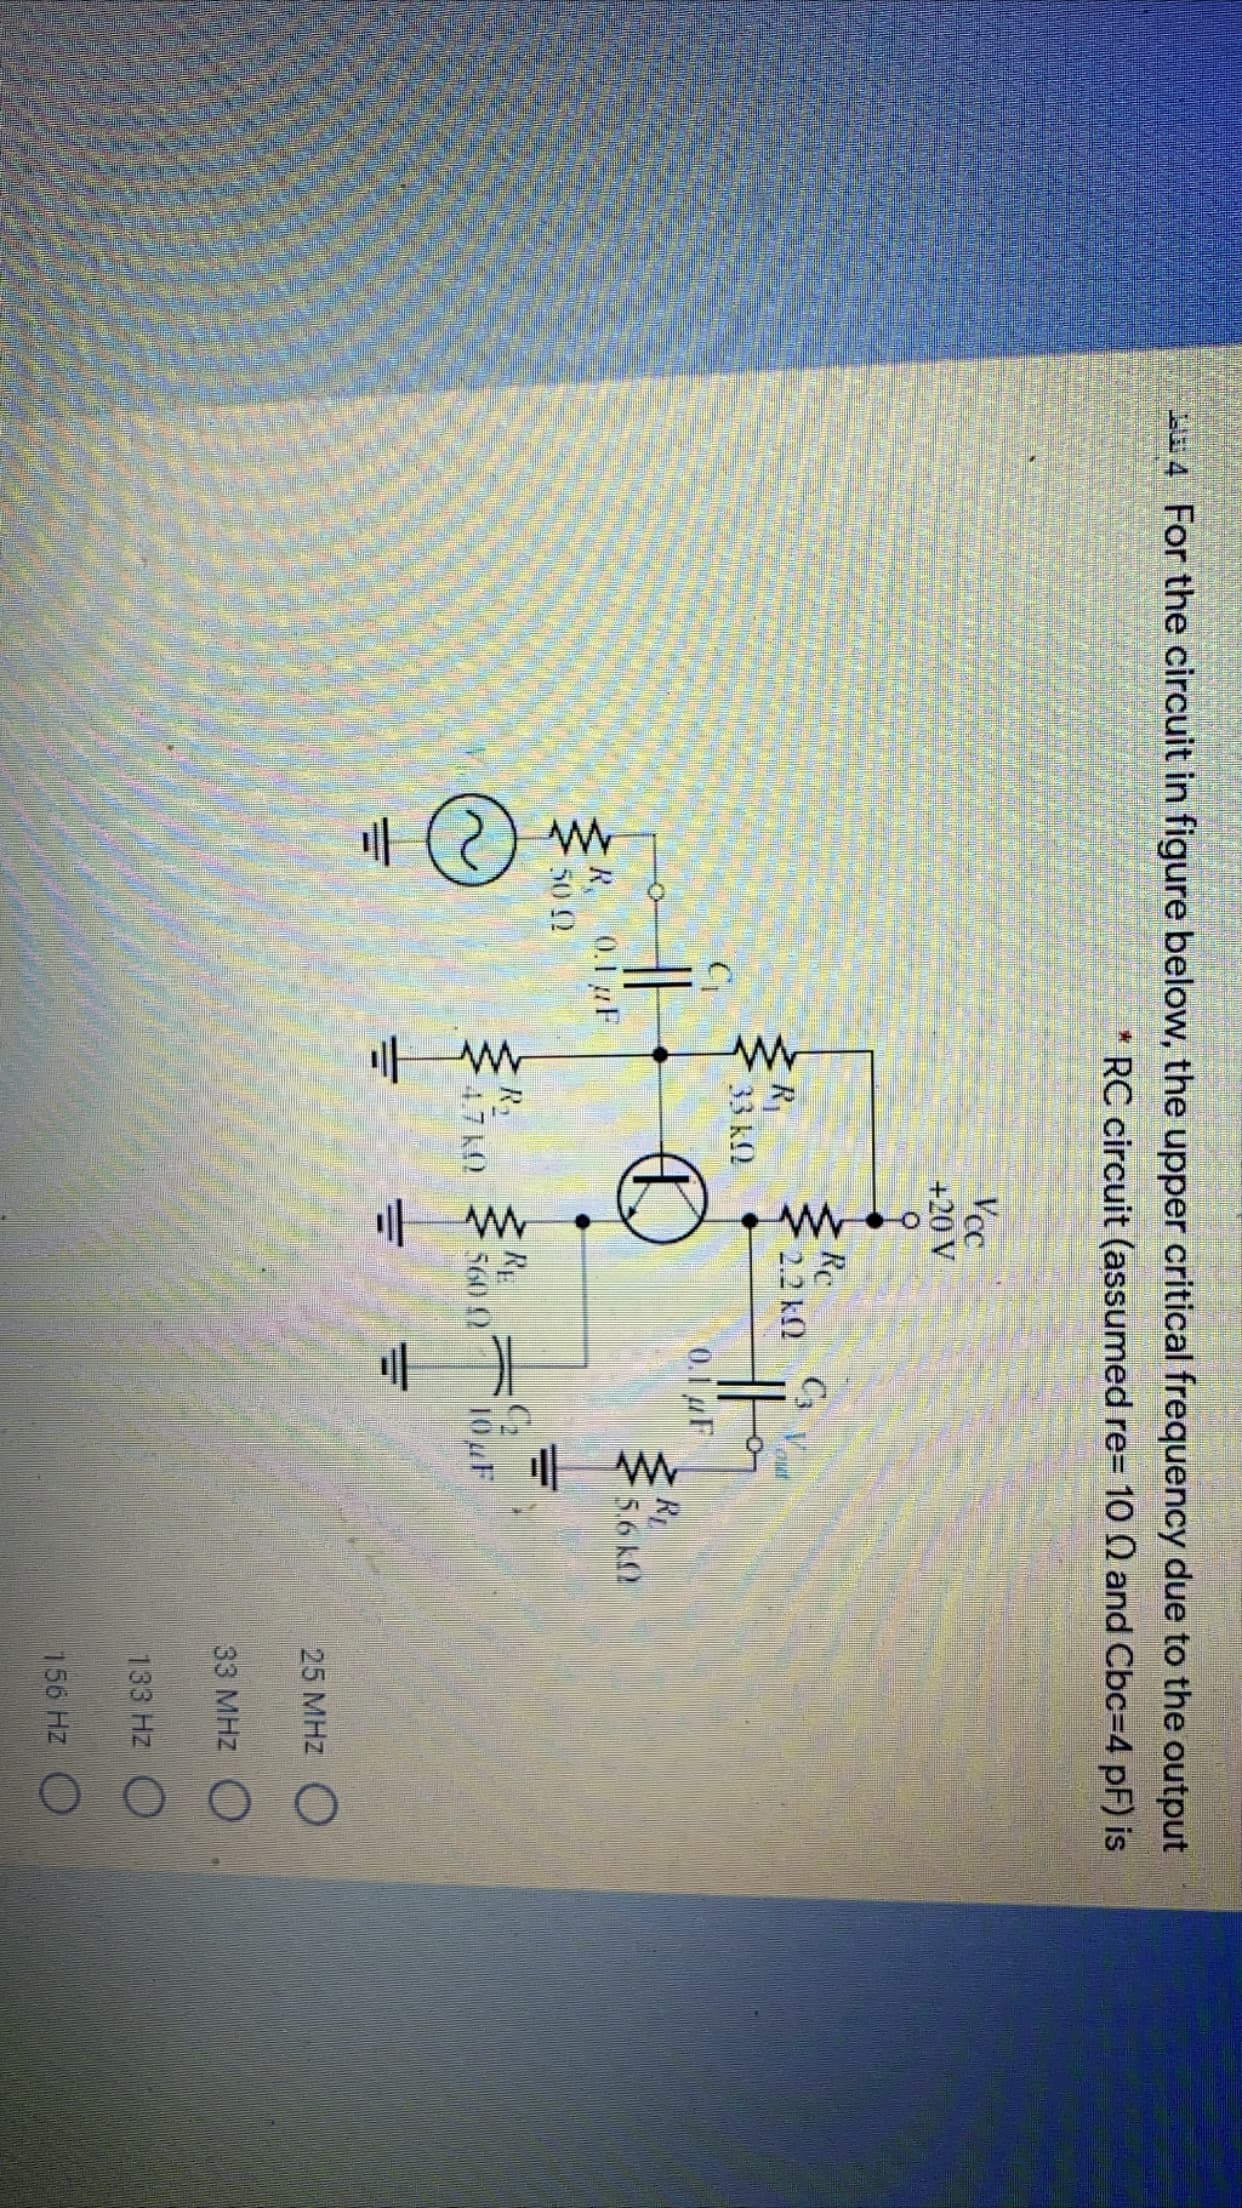 For the circuit in figure below, the upper critical frequency due to the output
RC circuit (assumed re=D 10 Q and Cbc=D4 pF) is
Vcc
+20 V
Rc
Cs Vou
2.2 k2
R1
33 k2
0.1 F
Rp
5.6 k2
R.
0.1 uF
50 2
R2
4.7 kO
10F
560 2
